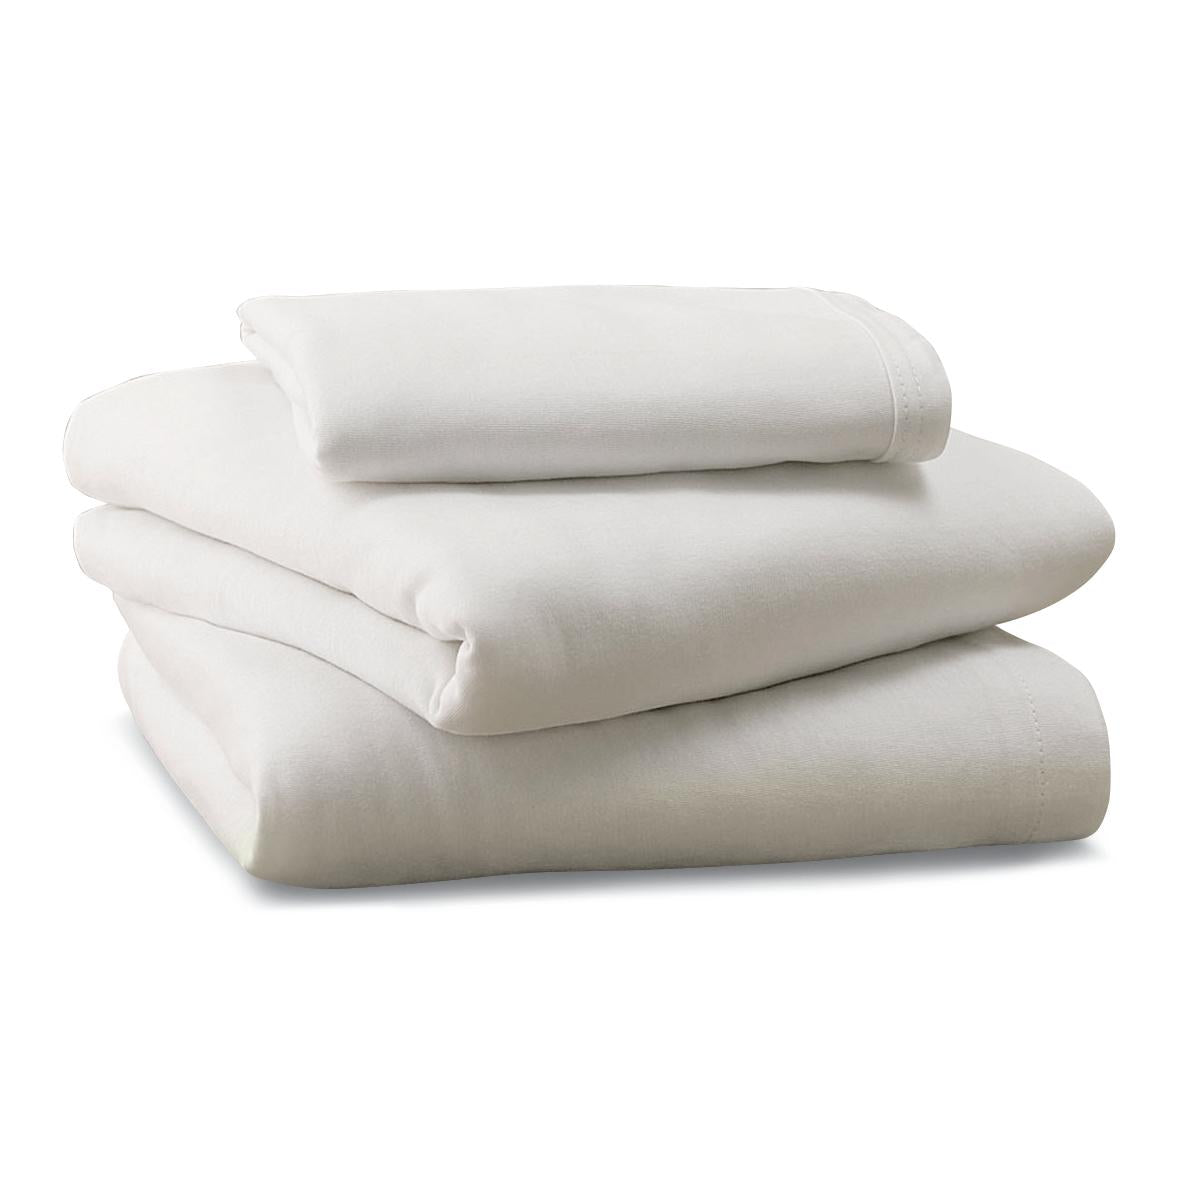 Soft-Fit Knitted Contour Sheet Set (Case of 6)